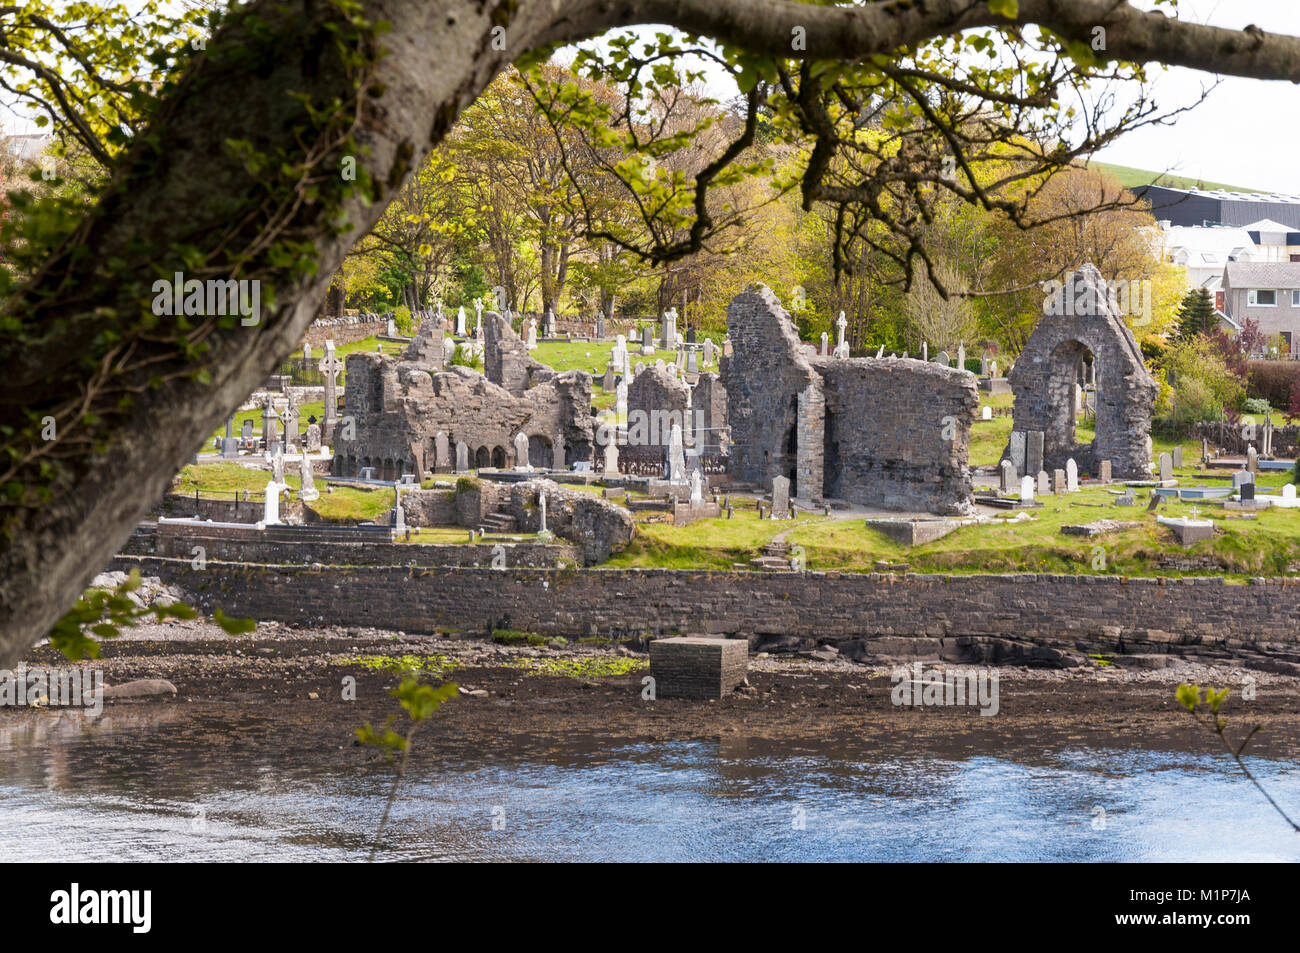 Ruins of Donegal Abbey and cemetery by River Eske, Donegal Town, Ireland Stock Photo